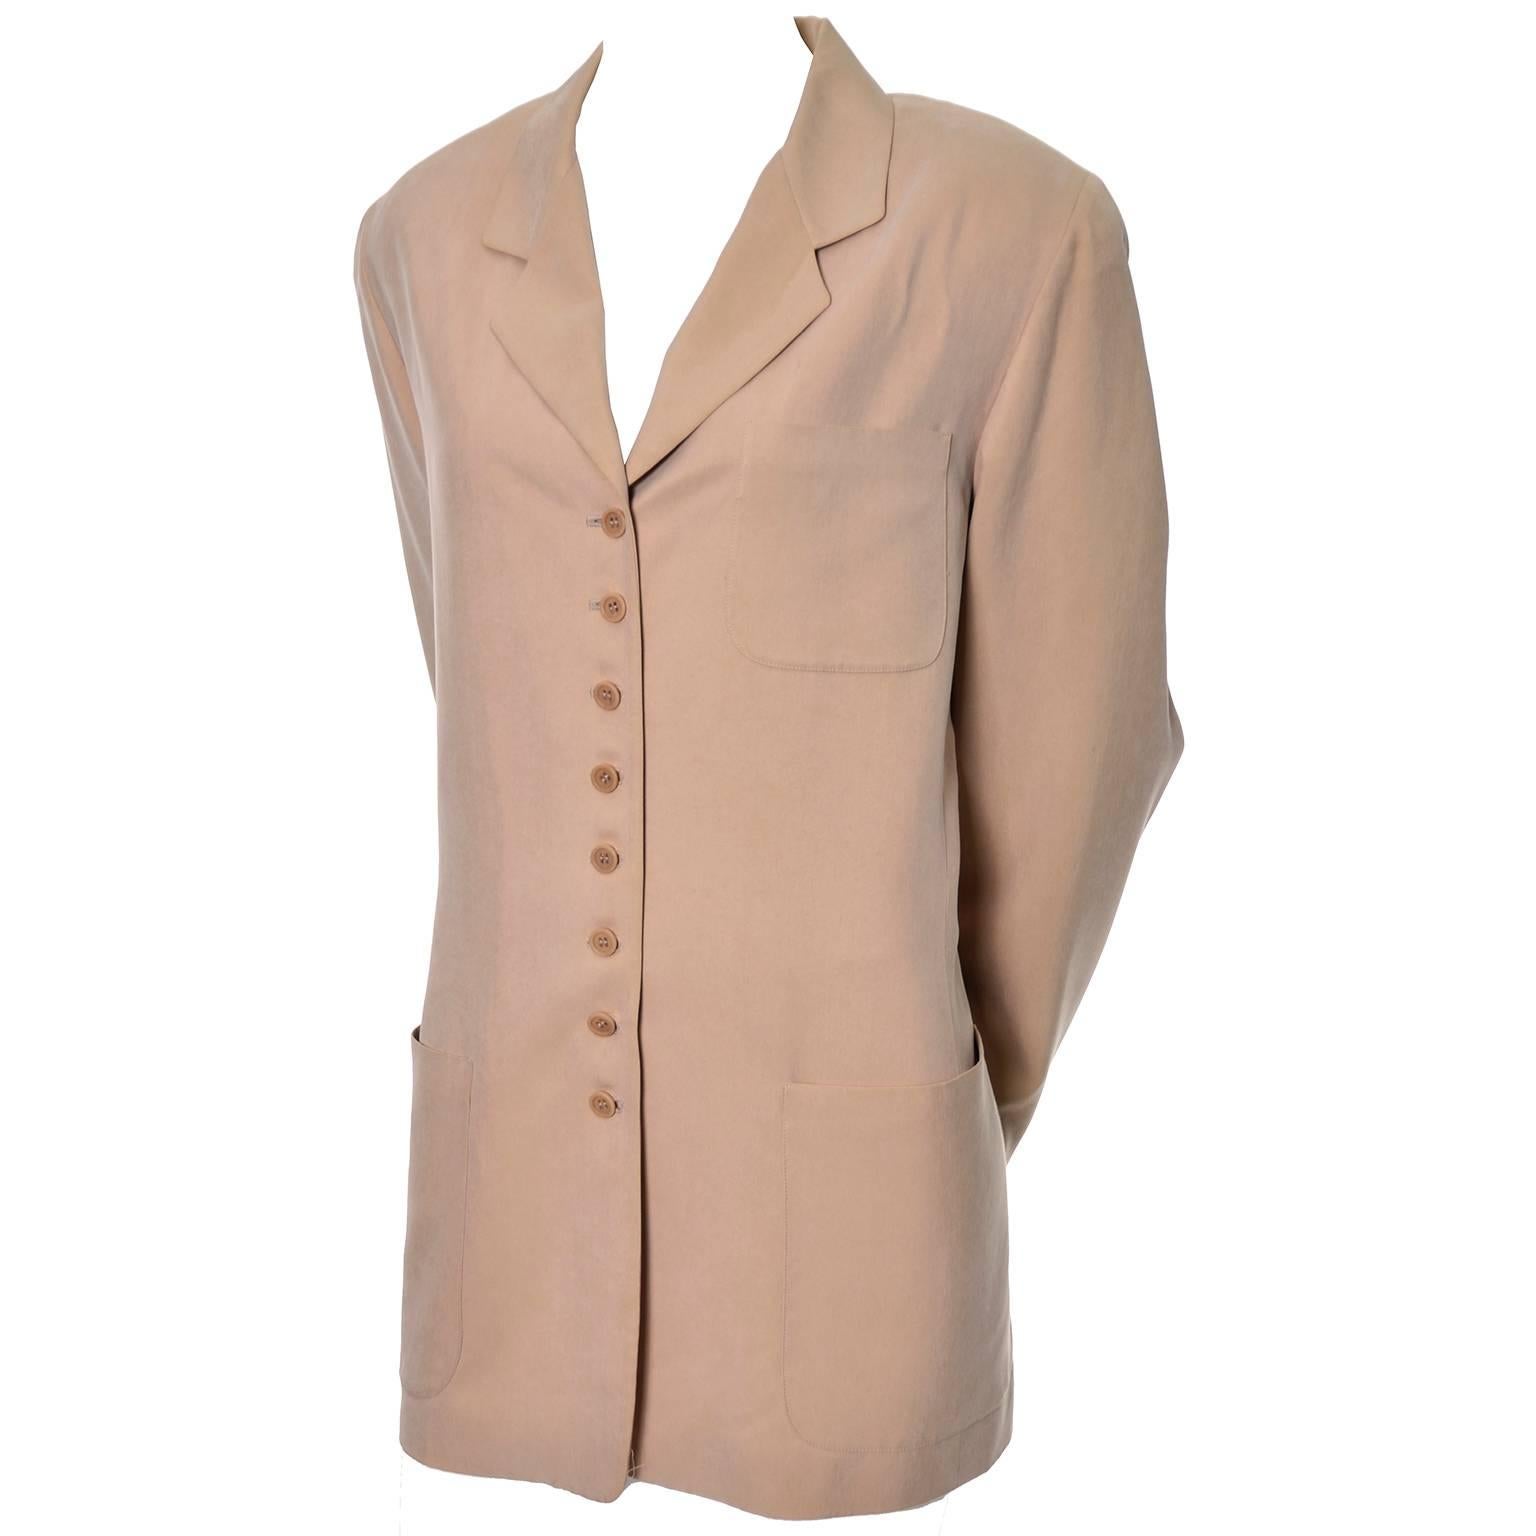 This beautiful sueded silk blazer was designed by Emanuel Ungaro and was made in Hong Kong in the  early 1990's.  This versatile jacket is fully lined and has front pockets, light shoulder pads, and buttons up the front with 8 buttons.  This is